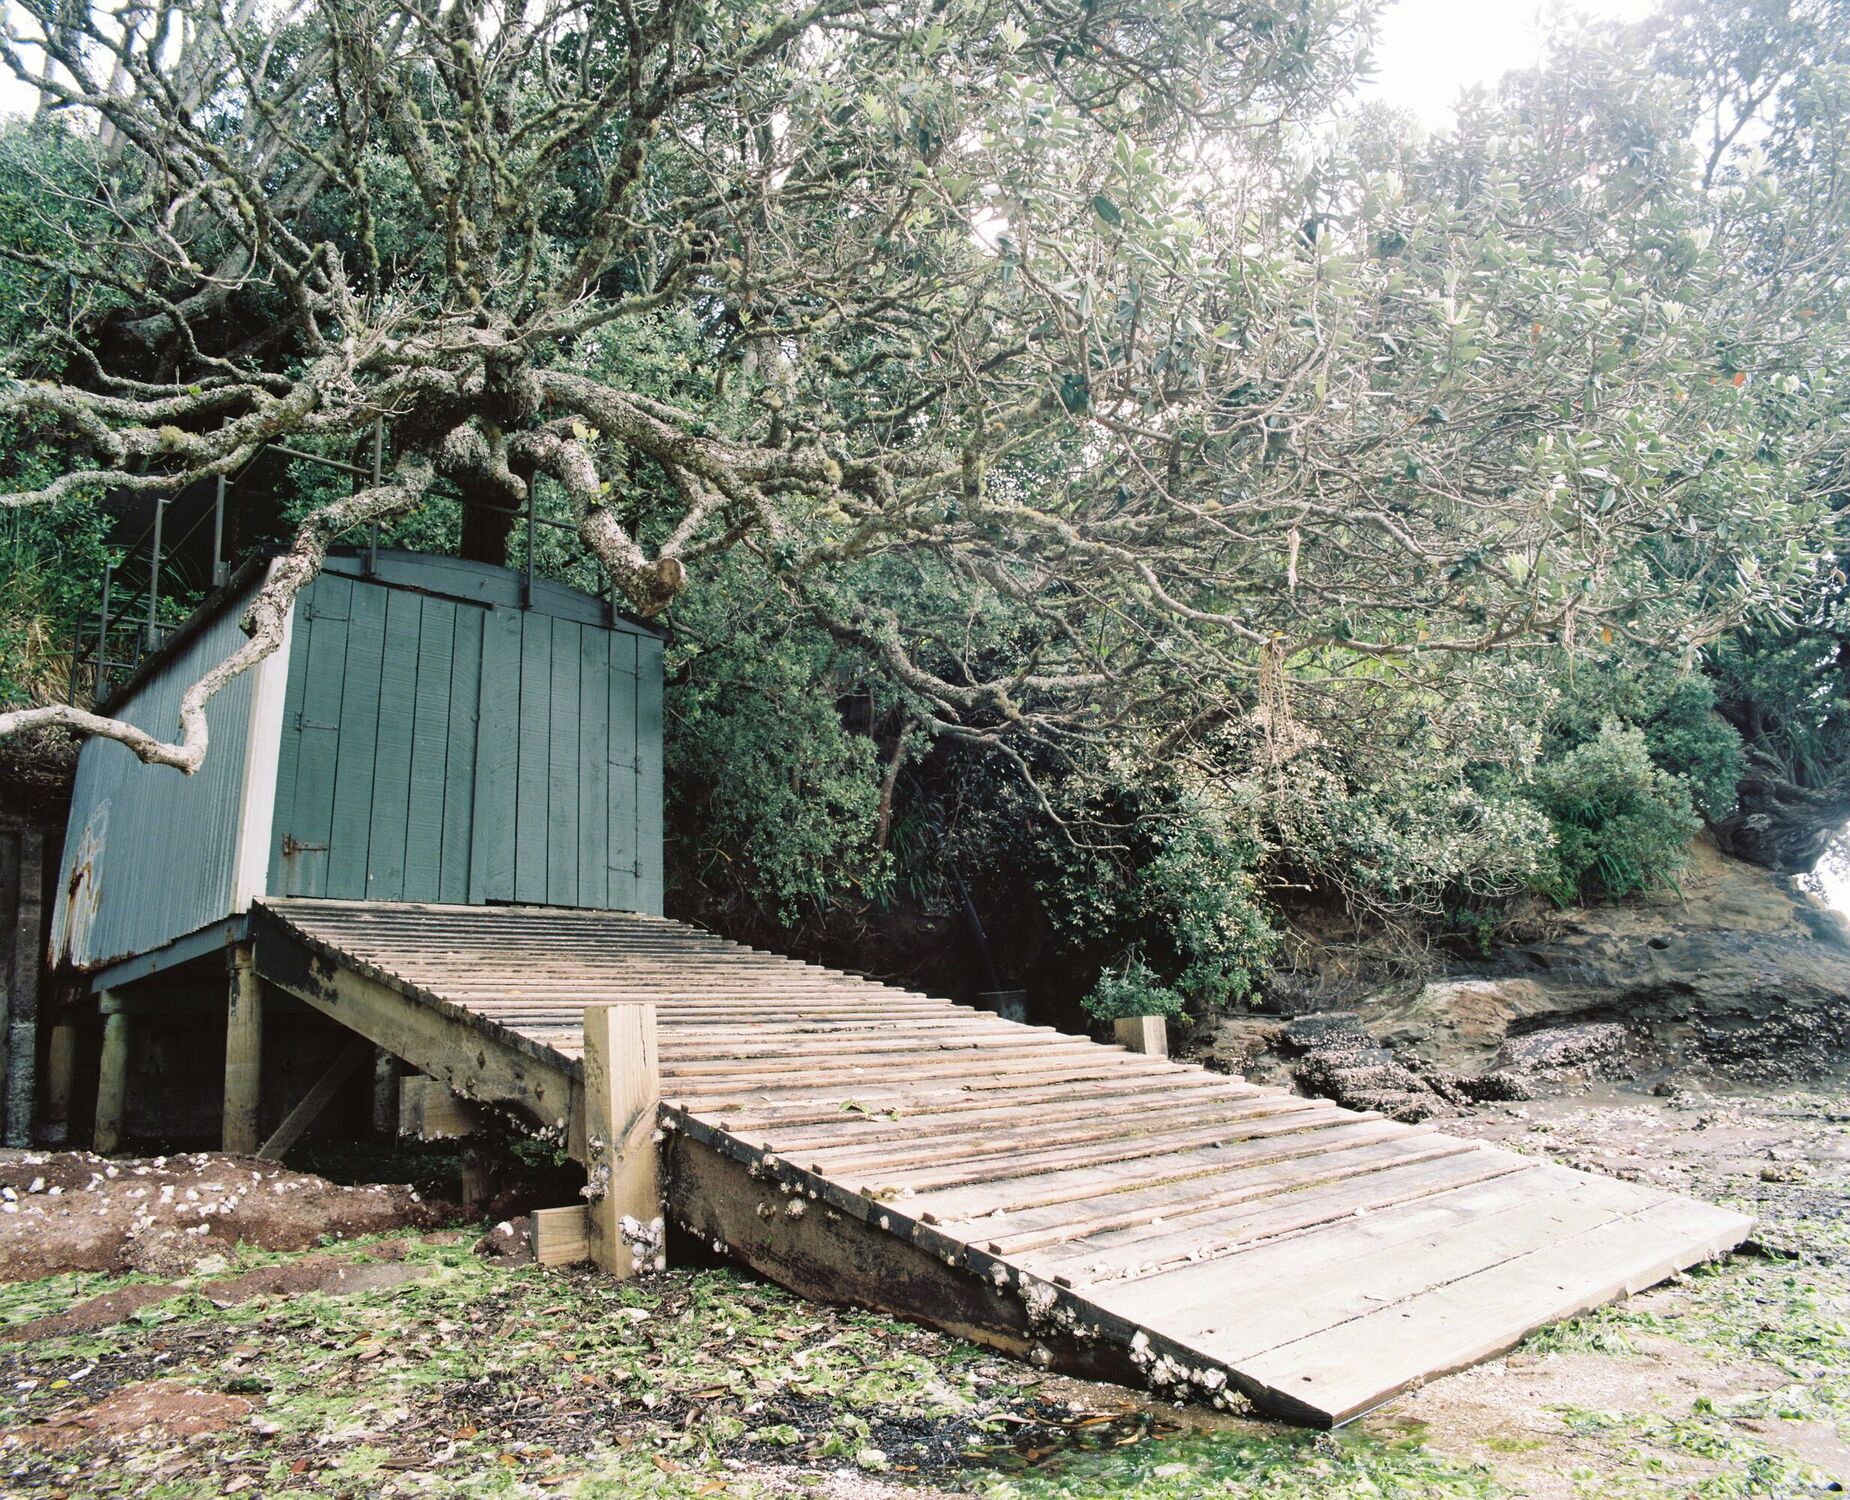 A boathouse under a tree nestled between the rocks